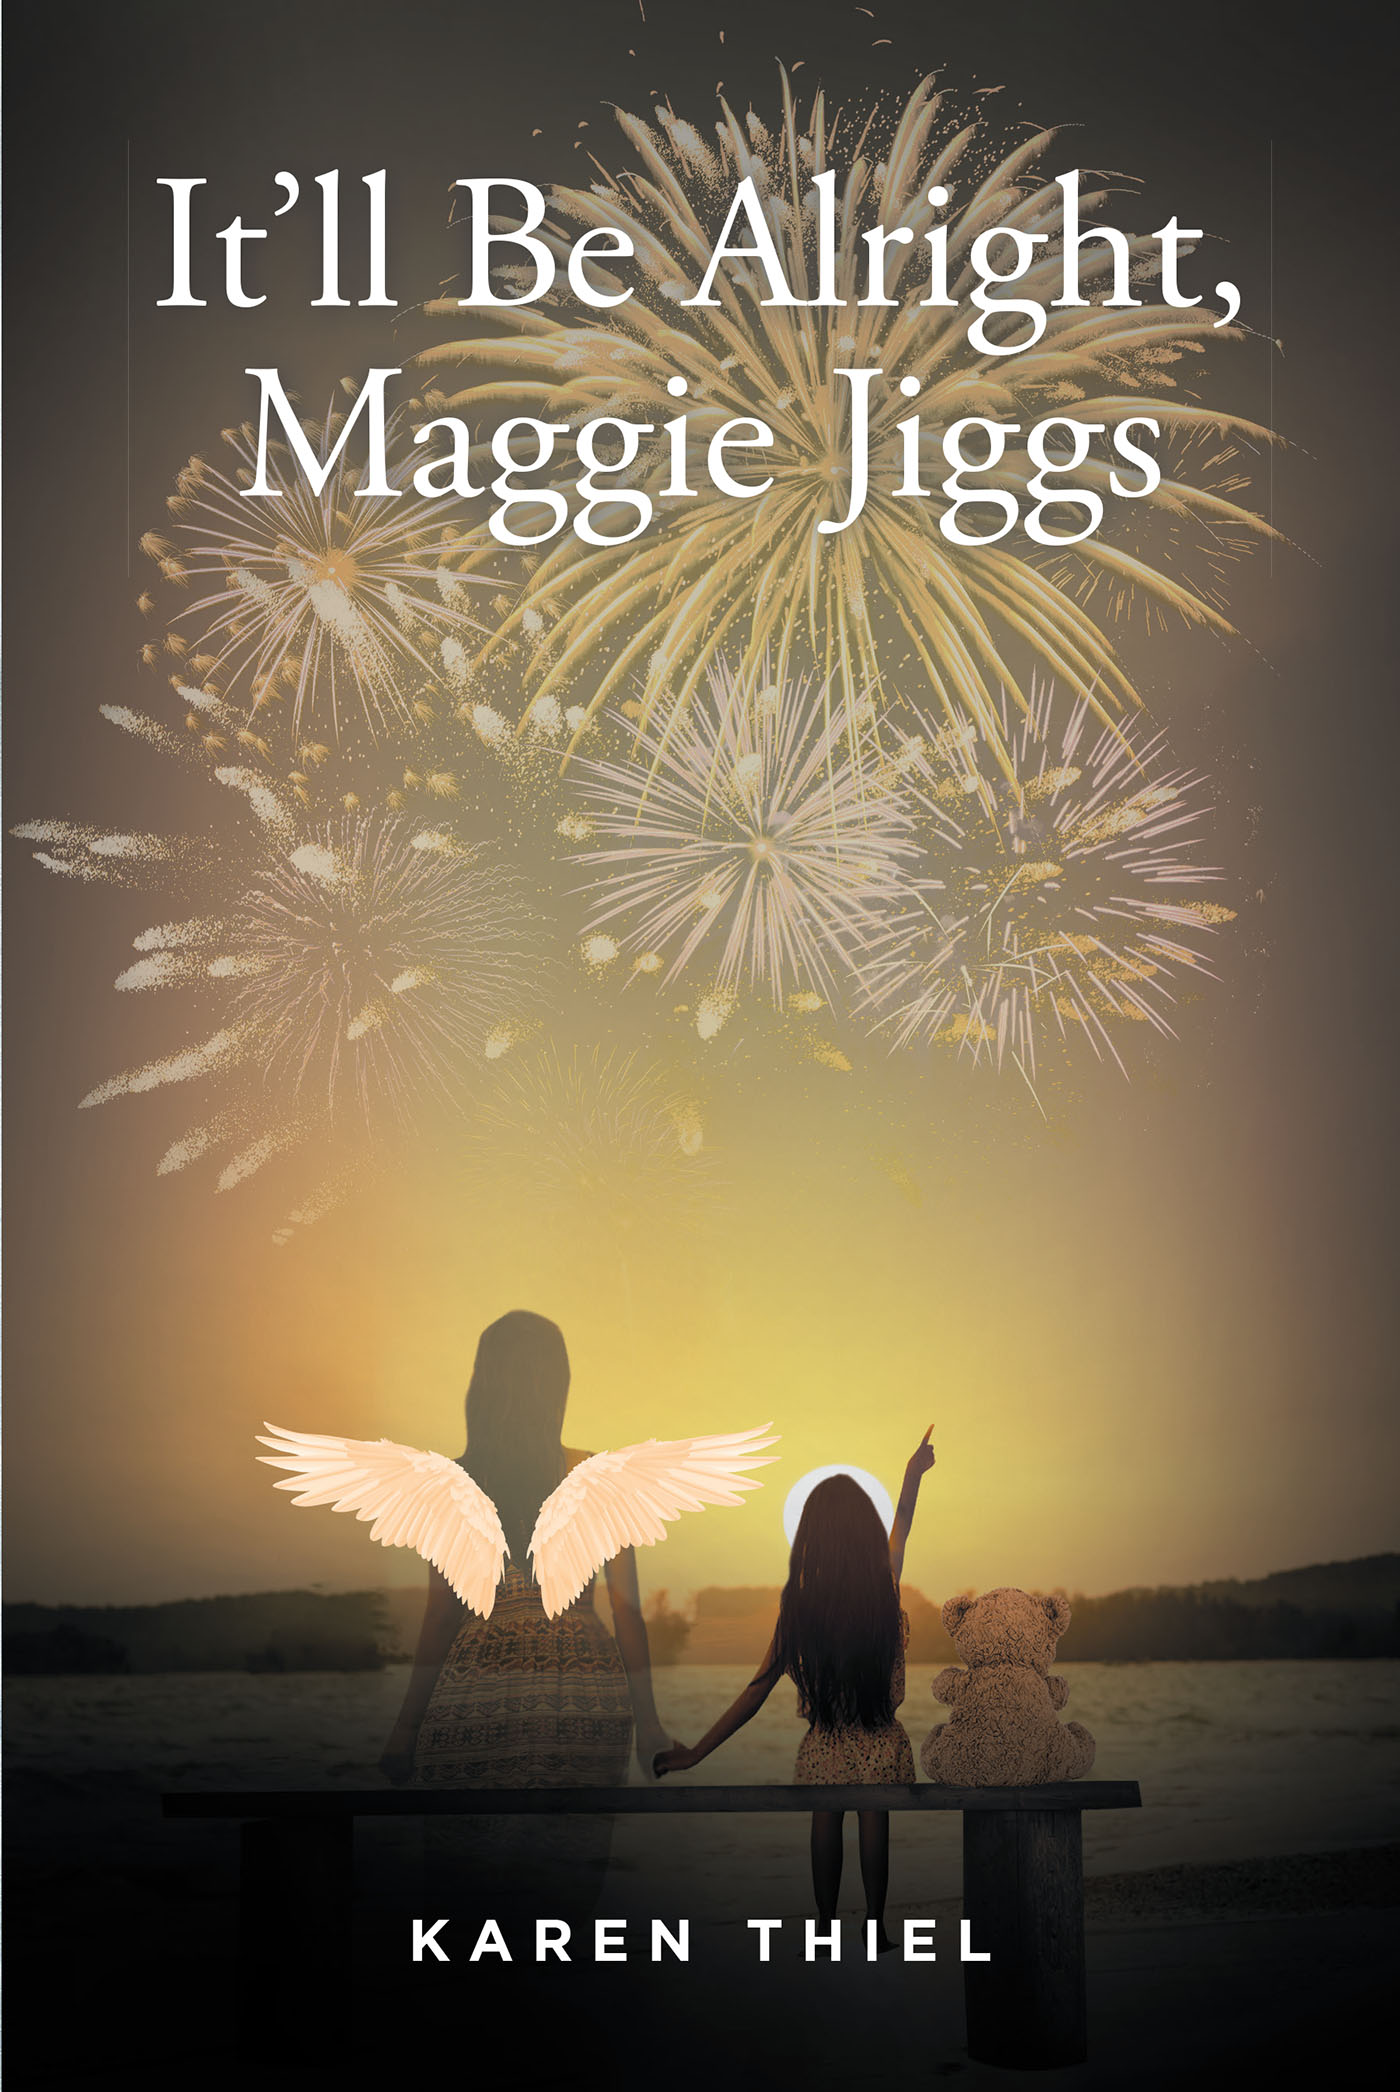 Karen Thiel’s New Book, "It'll Be Alright, Maggie Jiggs," Explores the Author's Grief Following the Loss of Her Mother and Her Past Experiences in Caring for Her Family